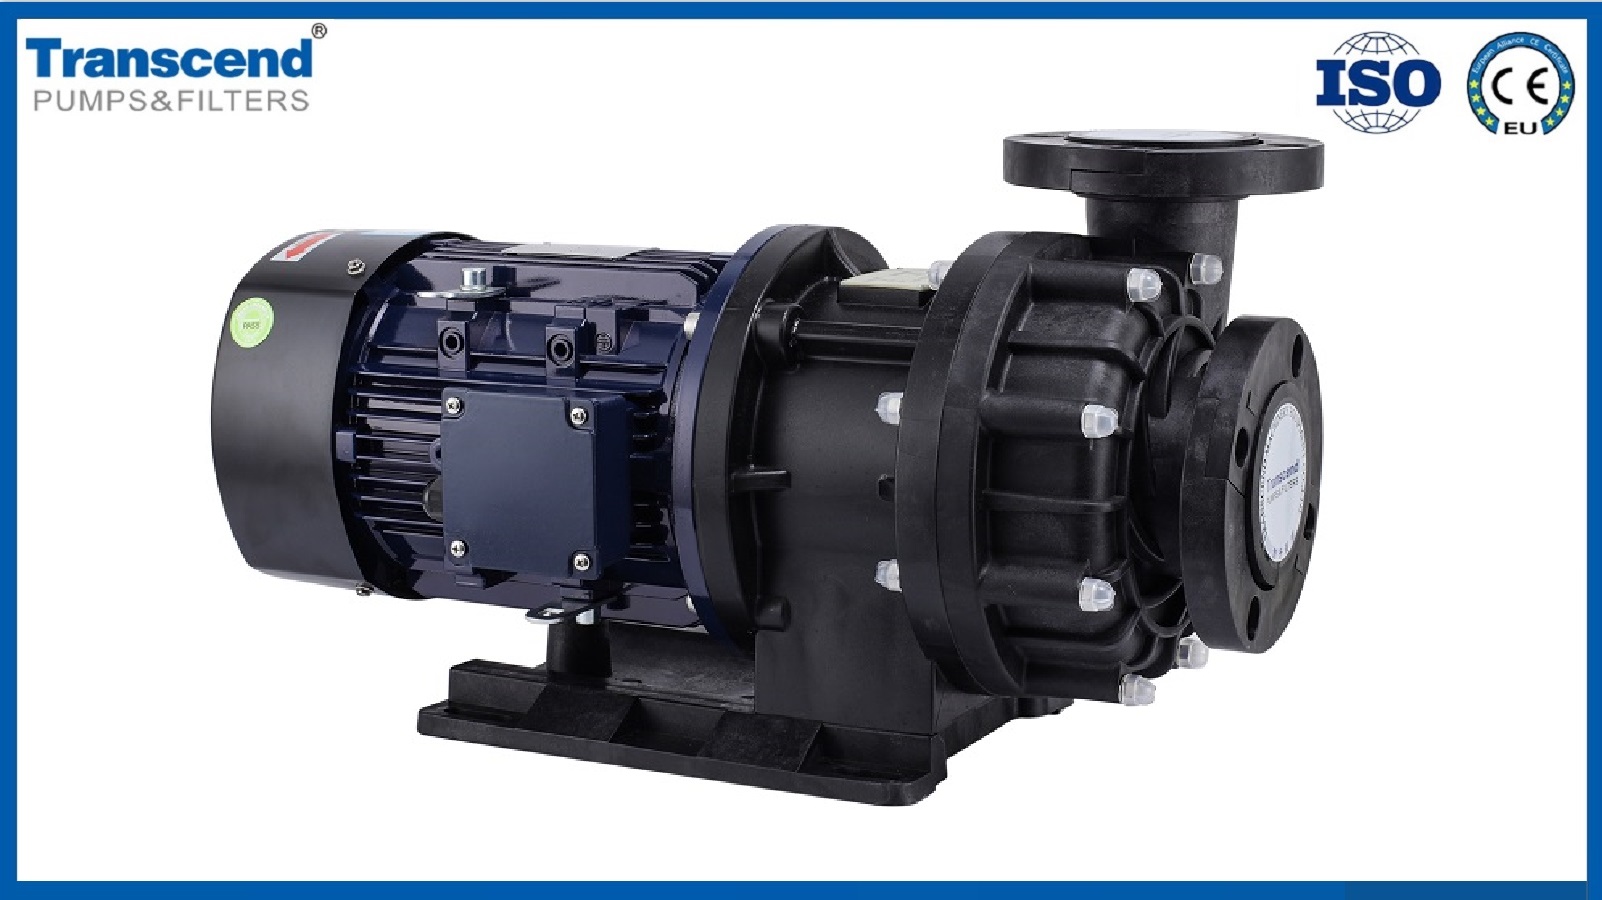  Wholesale Magnetic Drive Centrifugal Pump with good price - Transcend 